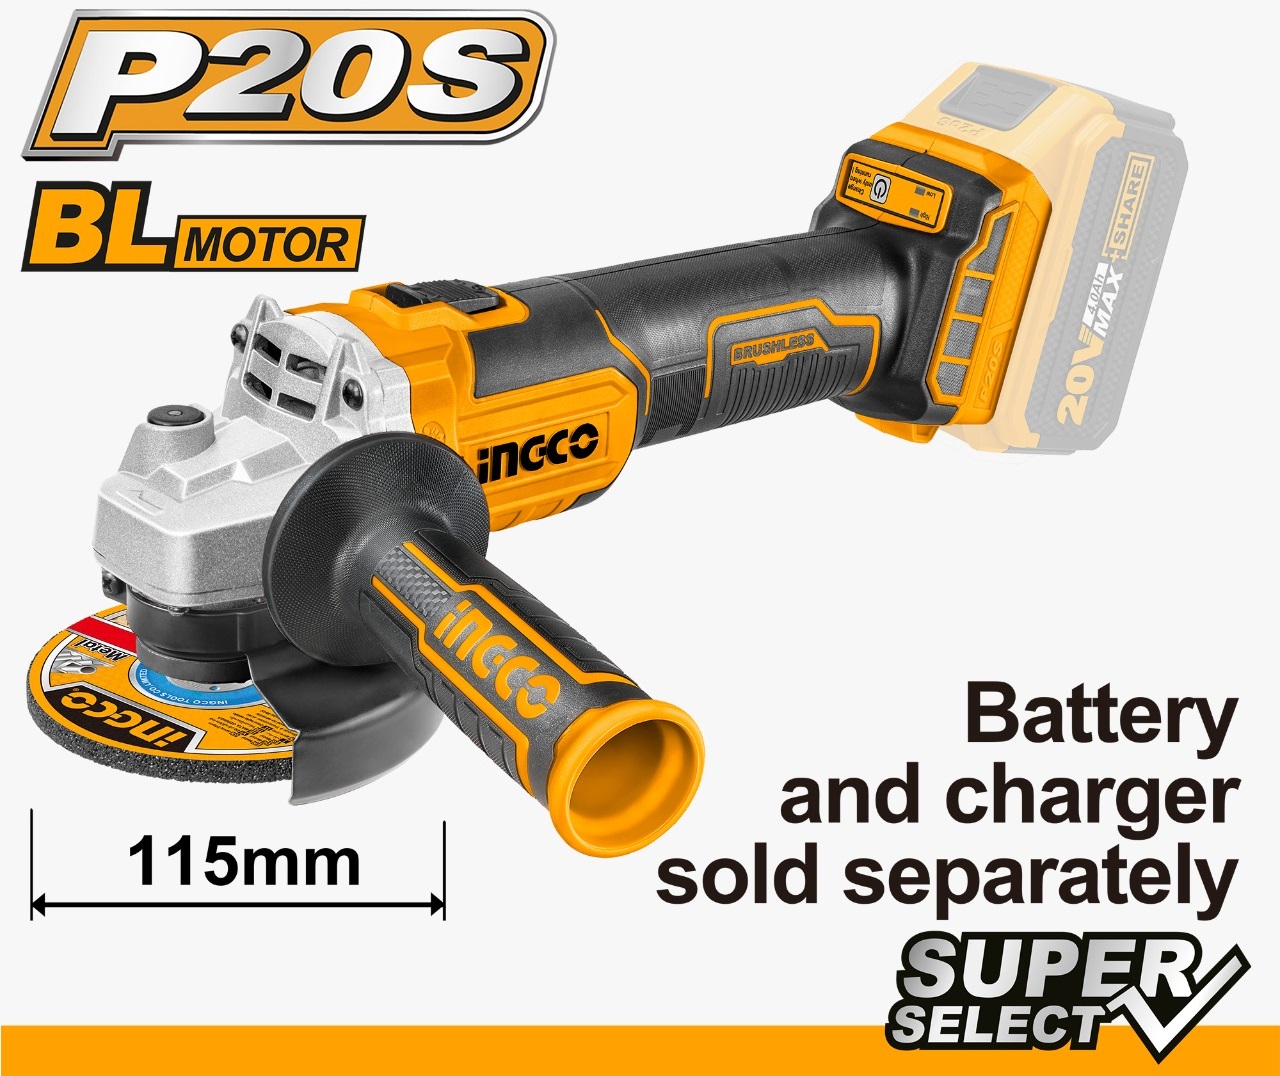 Brushless Motor. Voltage:20V. No-load speed:3000/8500rpm. Disc diameter:115mm. Spindle thread:M14. Battery and charger sold separately. Disc not included. Packed by colour box.